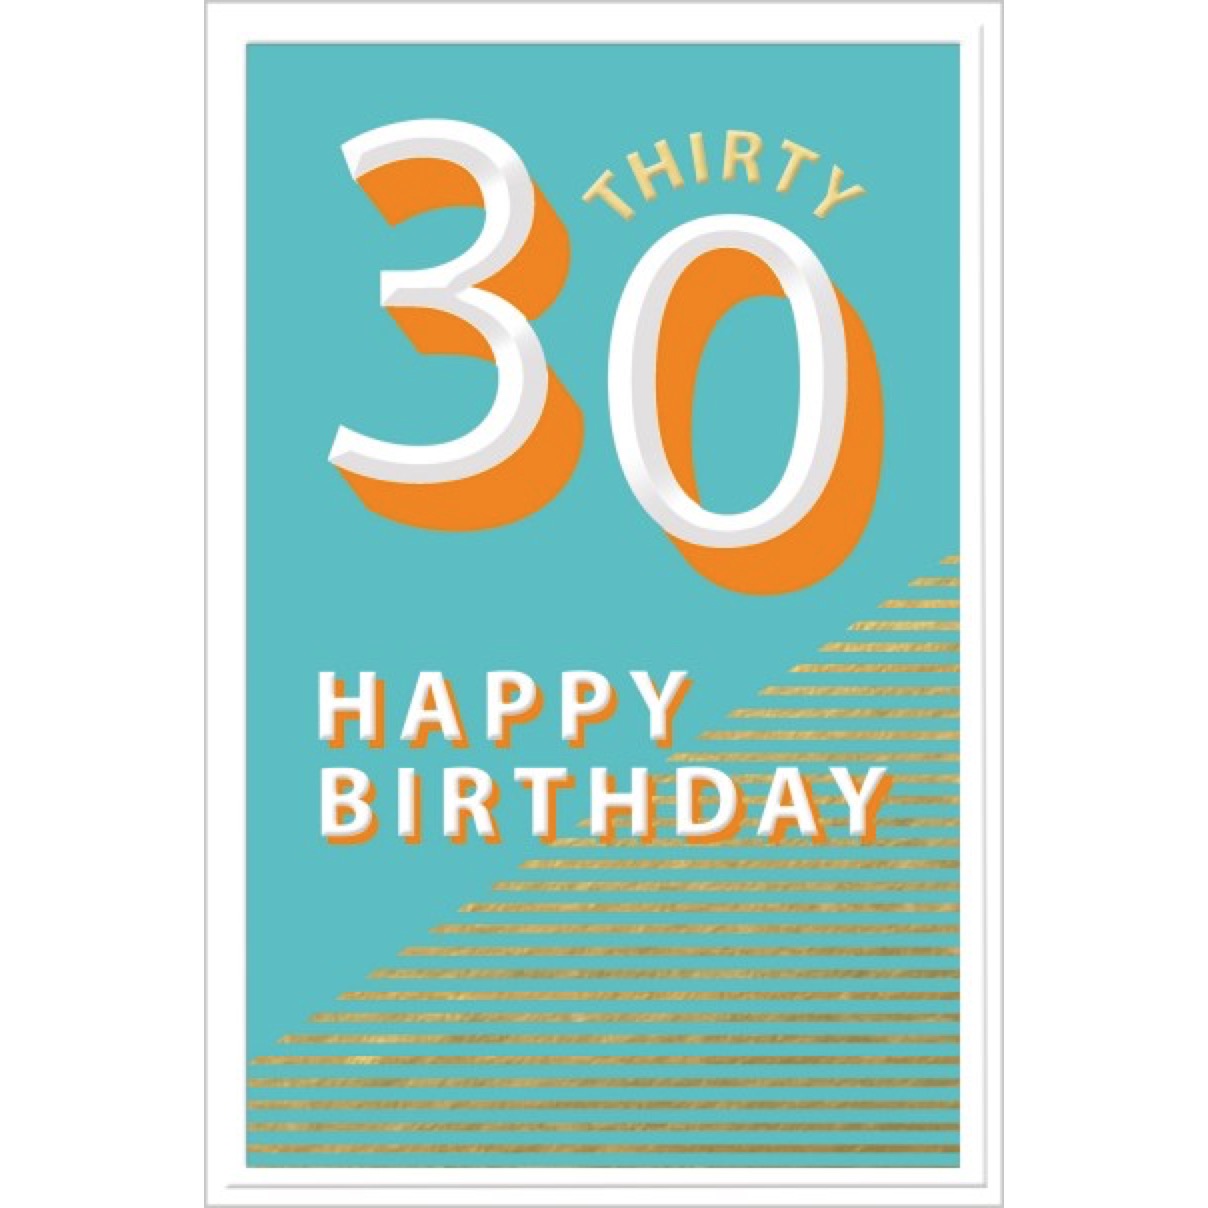 30th birthday card - Gifts online UK UK Delivery Yorkshire